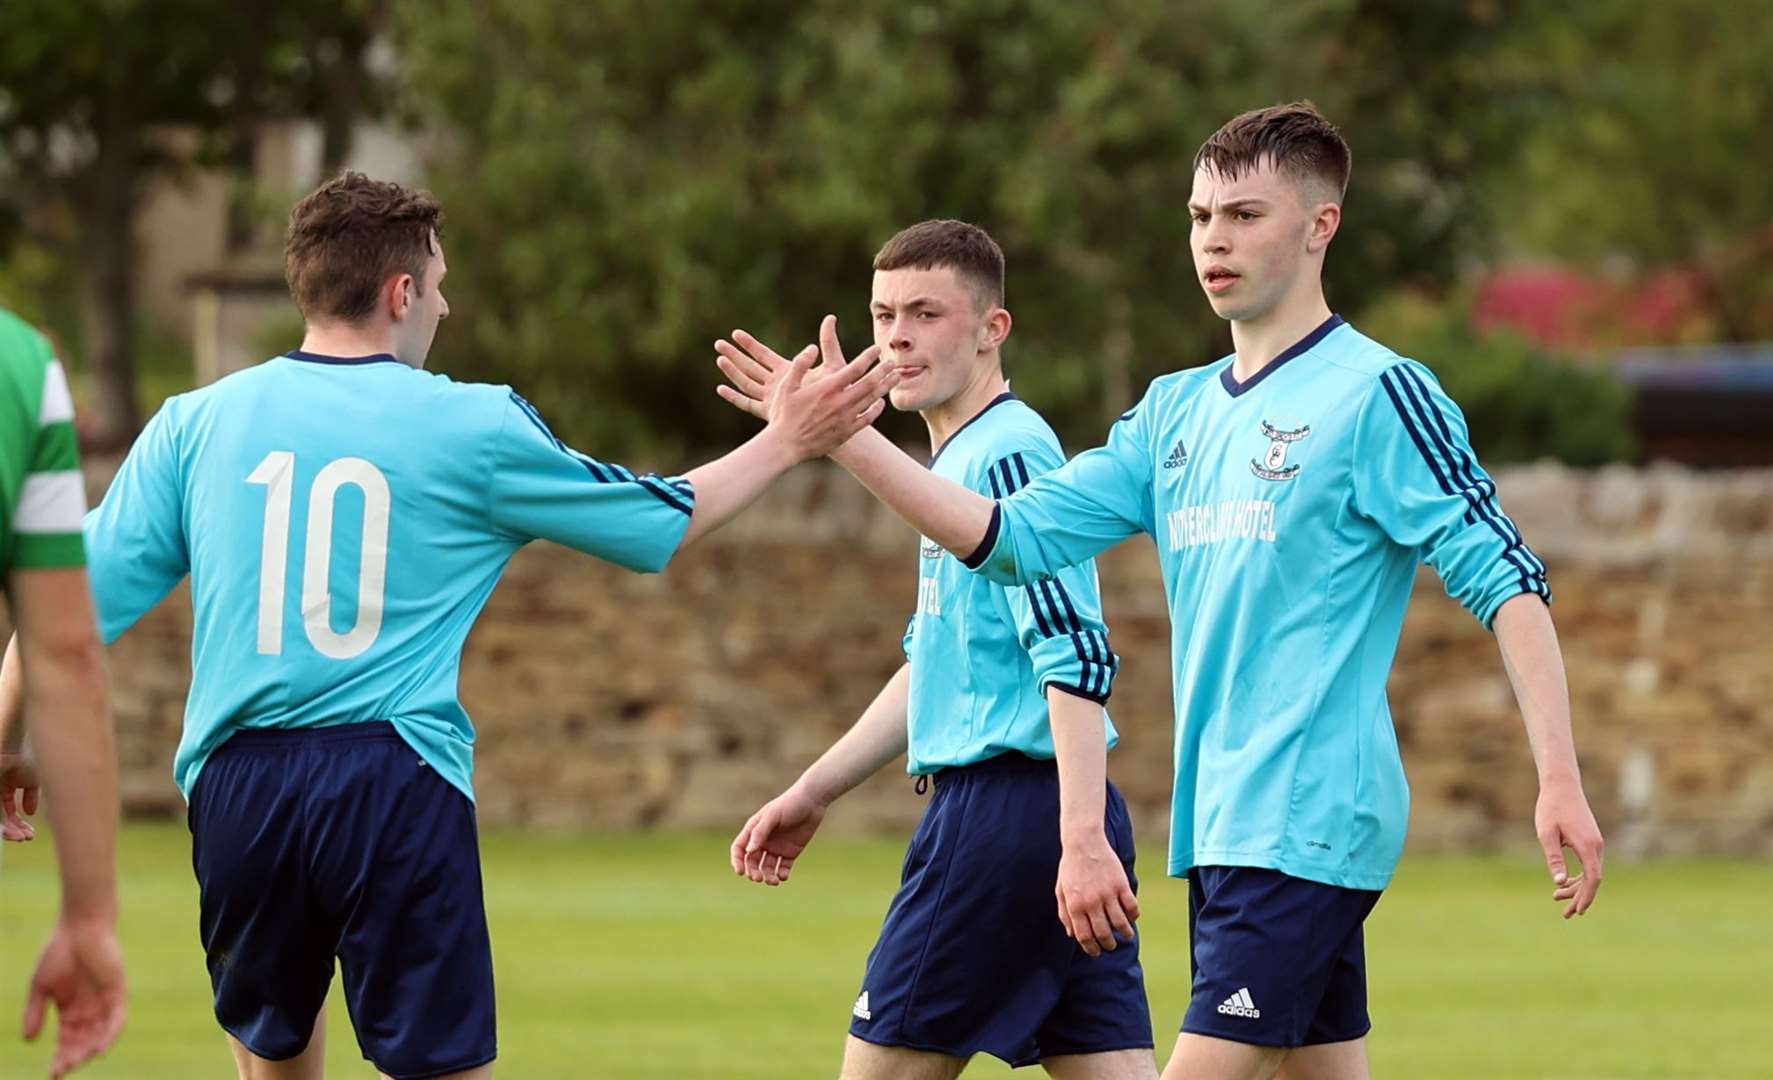 Number 10 Alan Mathieson congratulates Conor Farquhar on scoring the second goal for Wick Groats. Picture: James Gunn